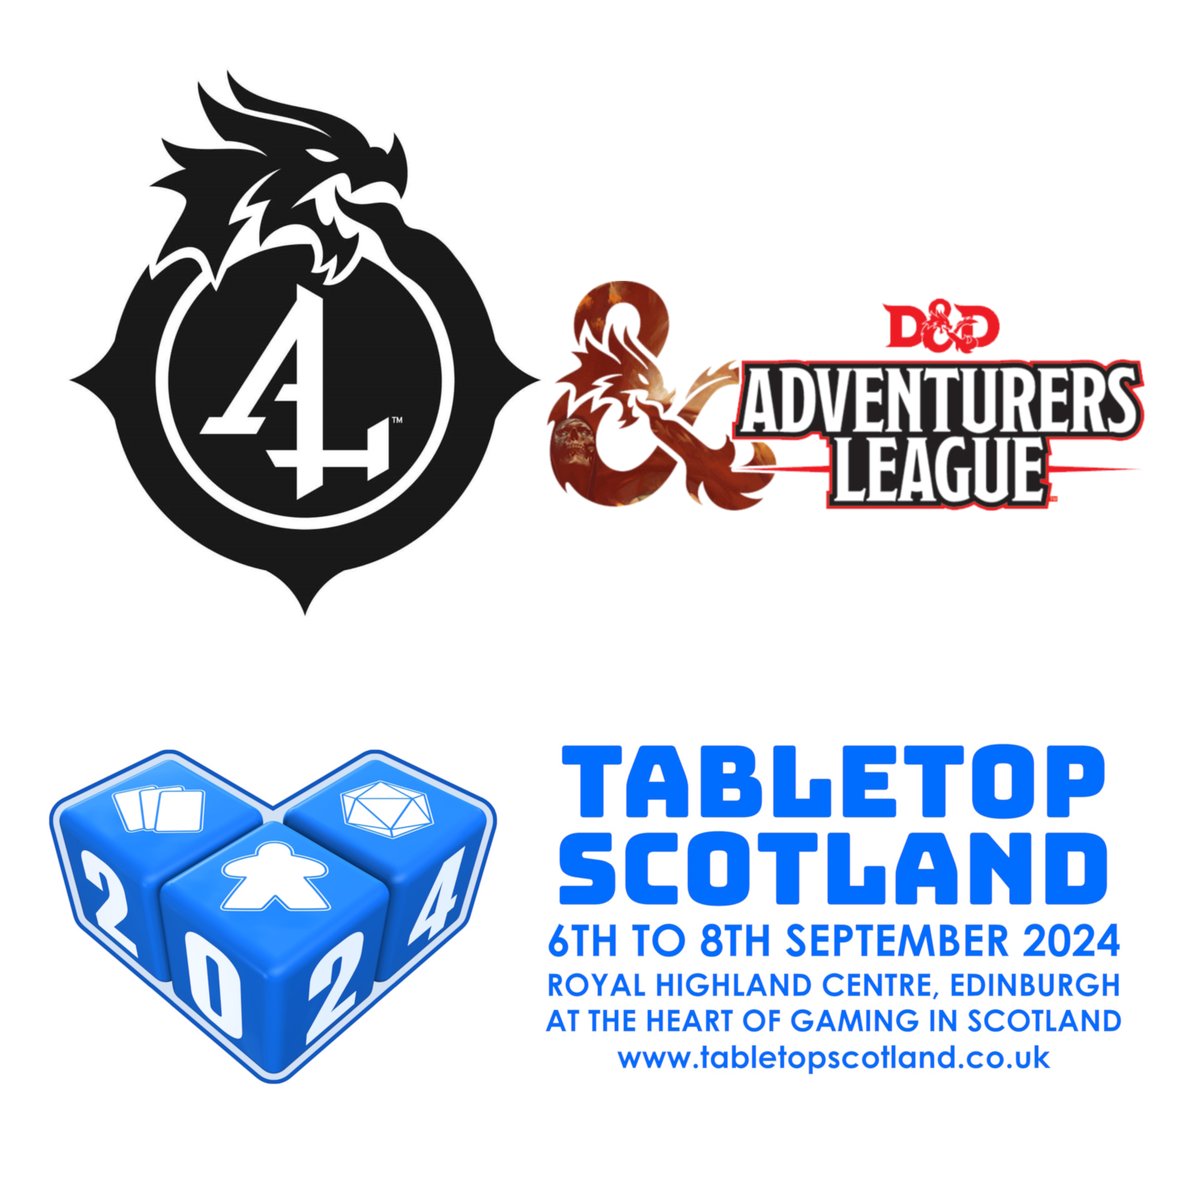 Event Spotlight: Our D&D Adventures League schedule is confirmed. With 78 sessions over the weekend, inc. 3 Epics, we have games for all players. Event booking opens Saturday May 4th @ 18:00. Review the schedule here: tabletopscotland.co.uk/events/dd-al-s… #TTS2024 #dnd5e #DDAL @DnD_AdvLeague